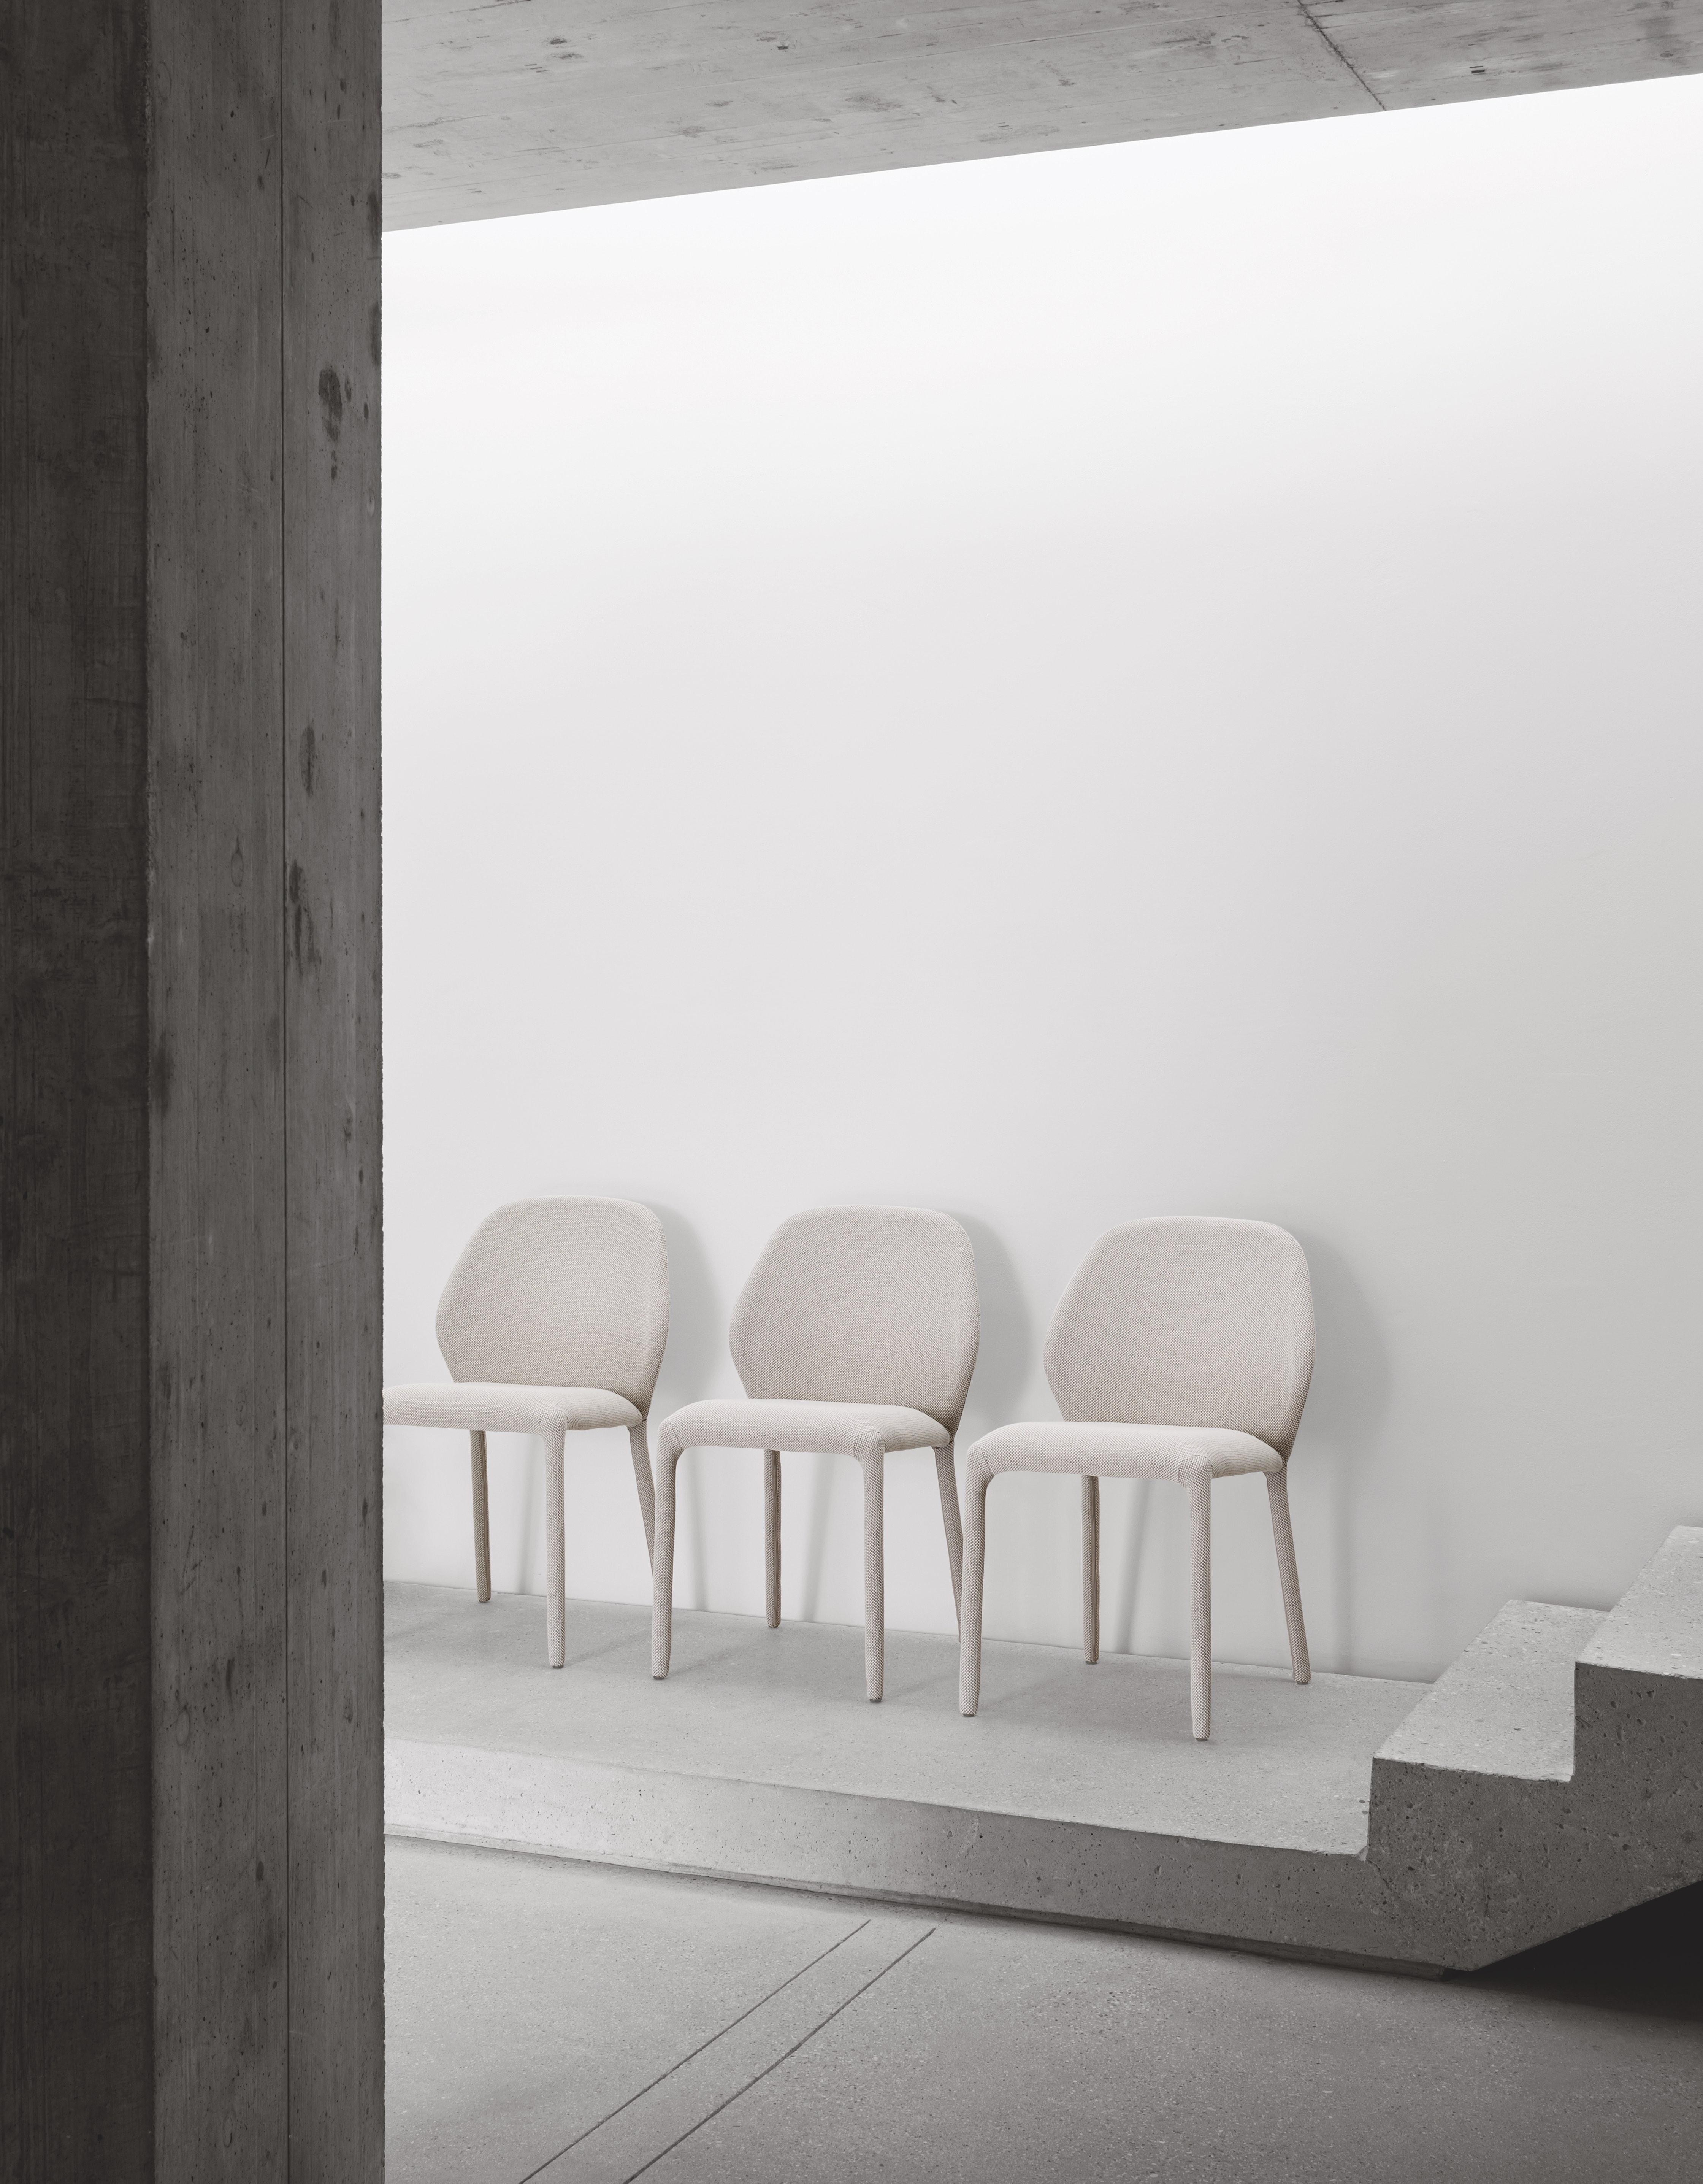 Dumbo is the universal padded chair, generous yet lightweight. Its backrest appears to have two ears extending from it, making it even bigger and cosier. 

Founded in 2006 by Enrica Cavarzan and Marco Zavagno, Zaven is a design studio dedicated to